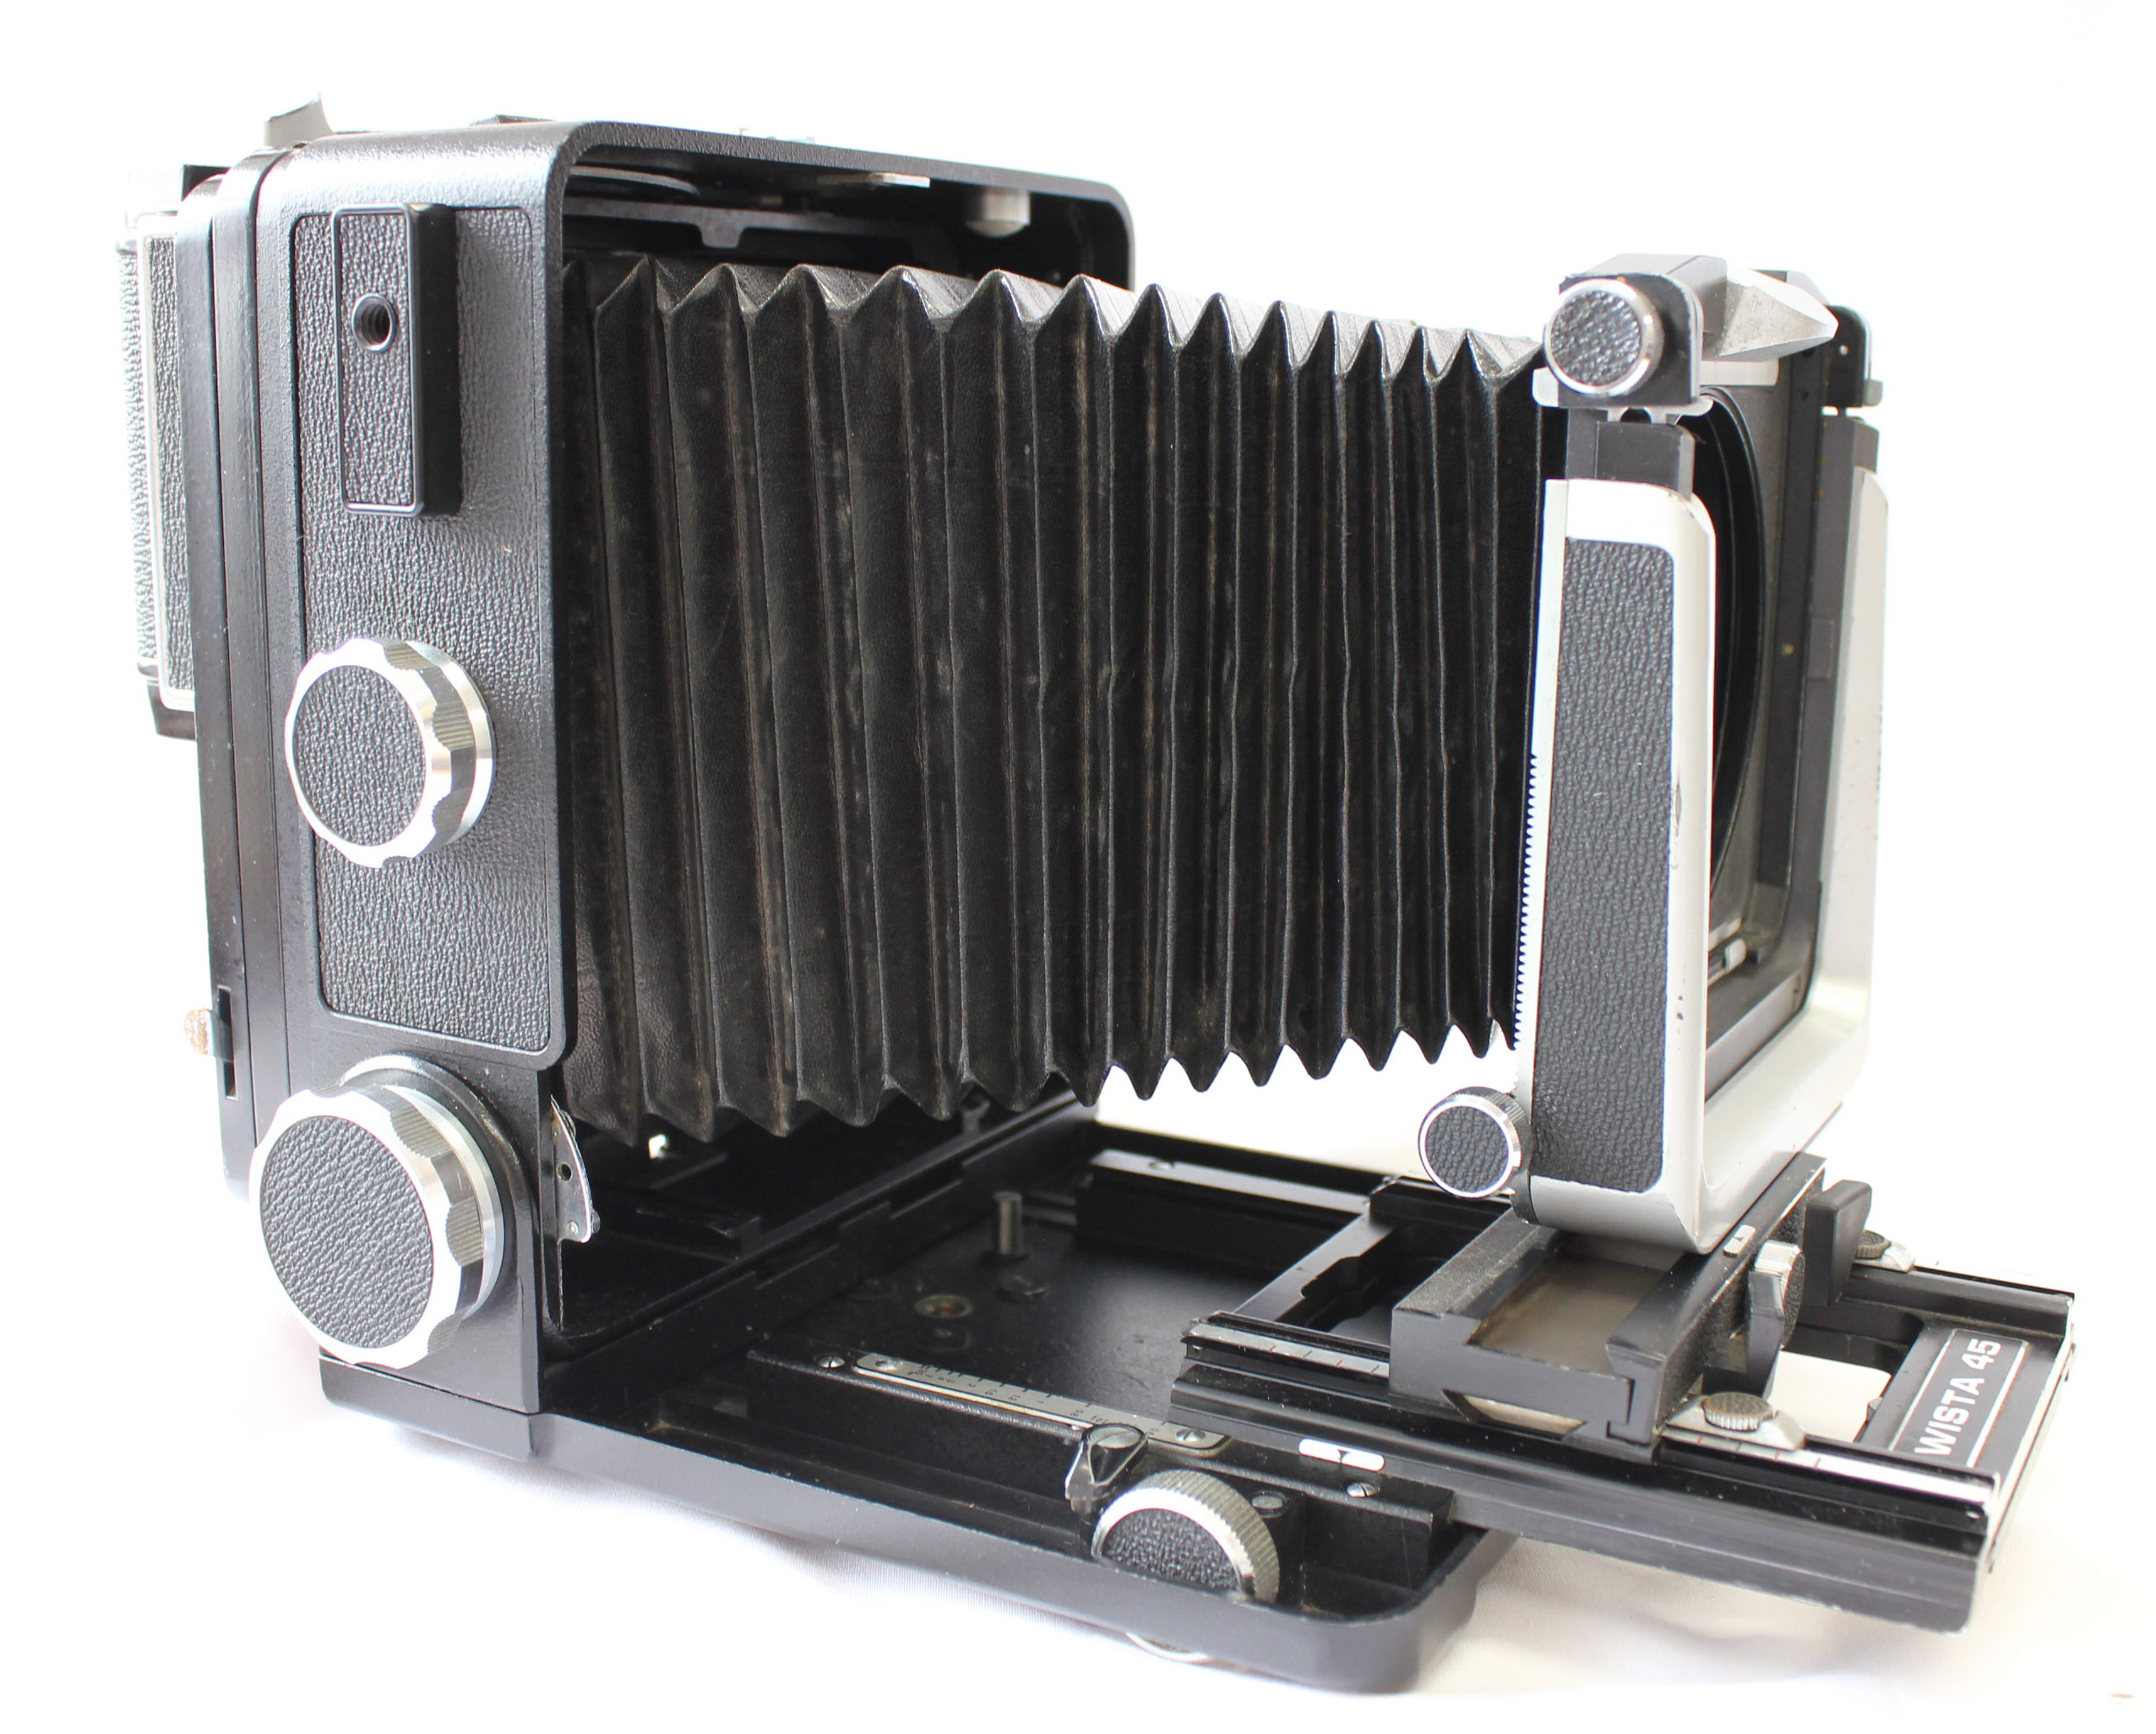  Wista 45 45D 4x5 Large Format Camera w/ 6x9 Roll FIlm Holder & Quick Roll Slider from Japan Photo 2